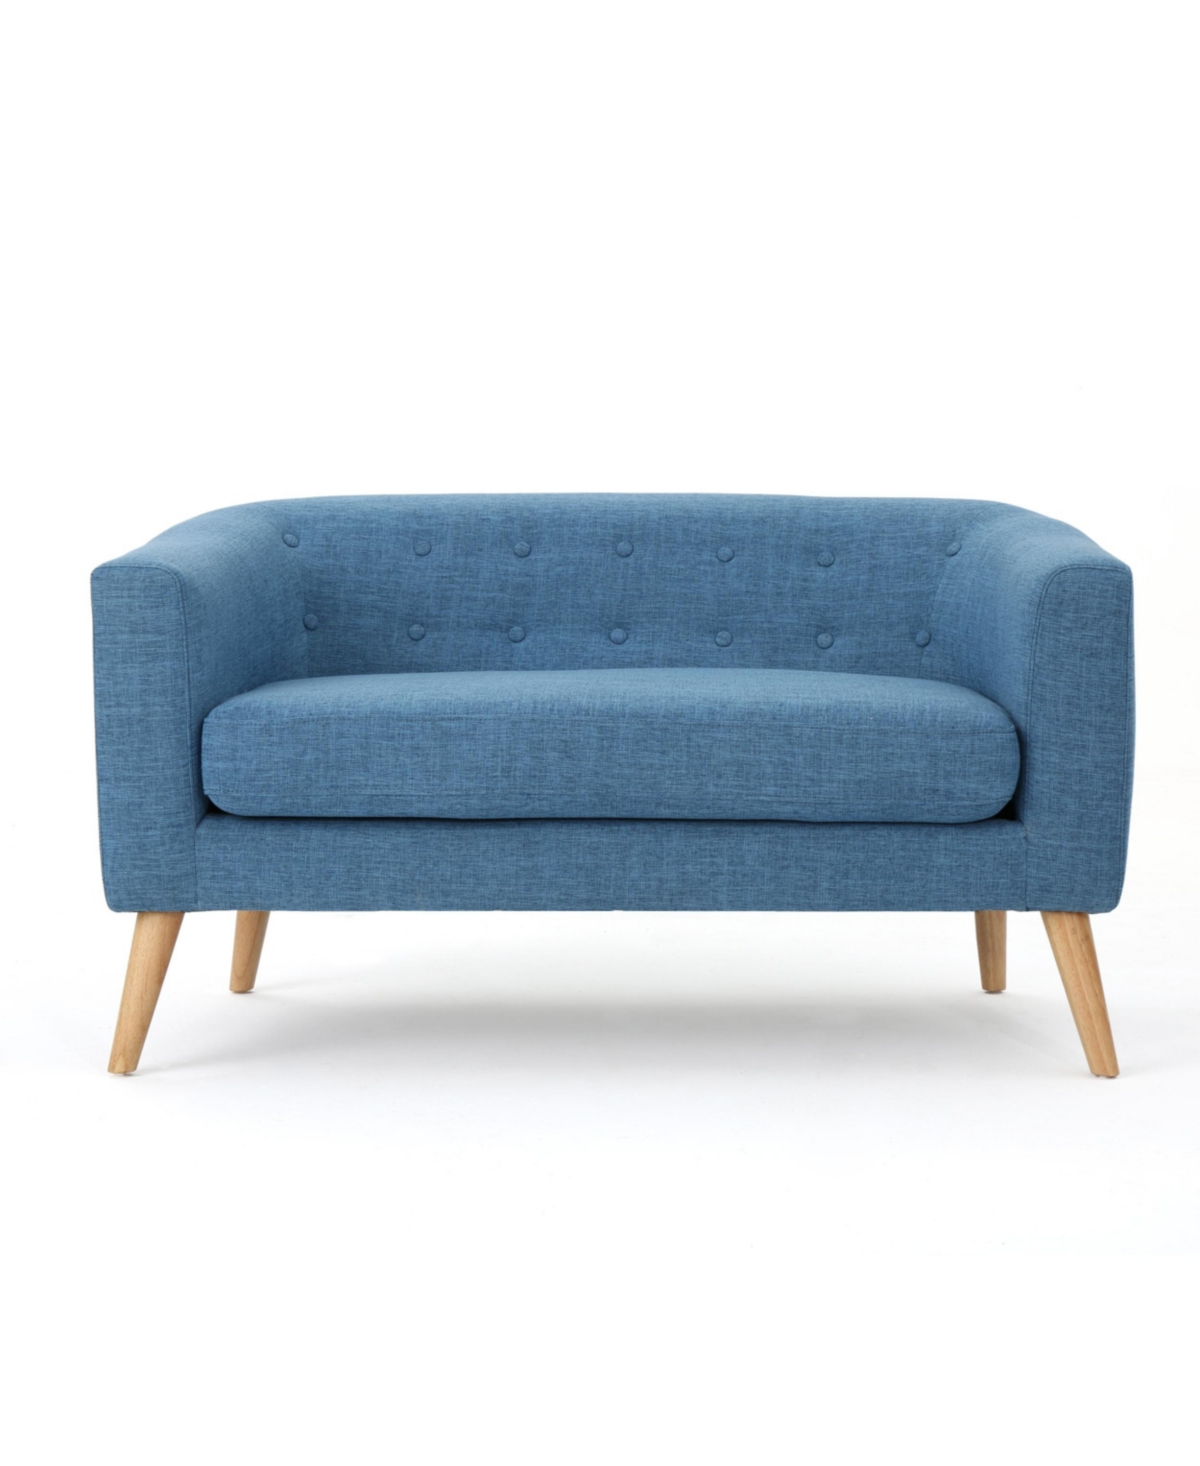 Noble House Bridie Muted Mid Century Modern Loveseat In Muted Blue